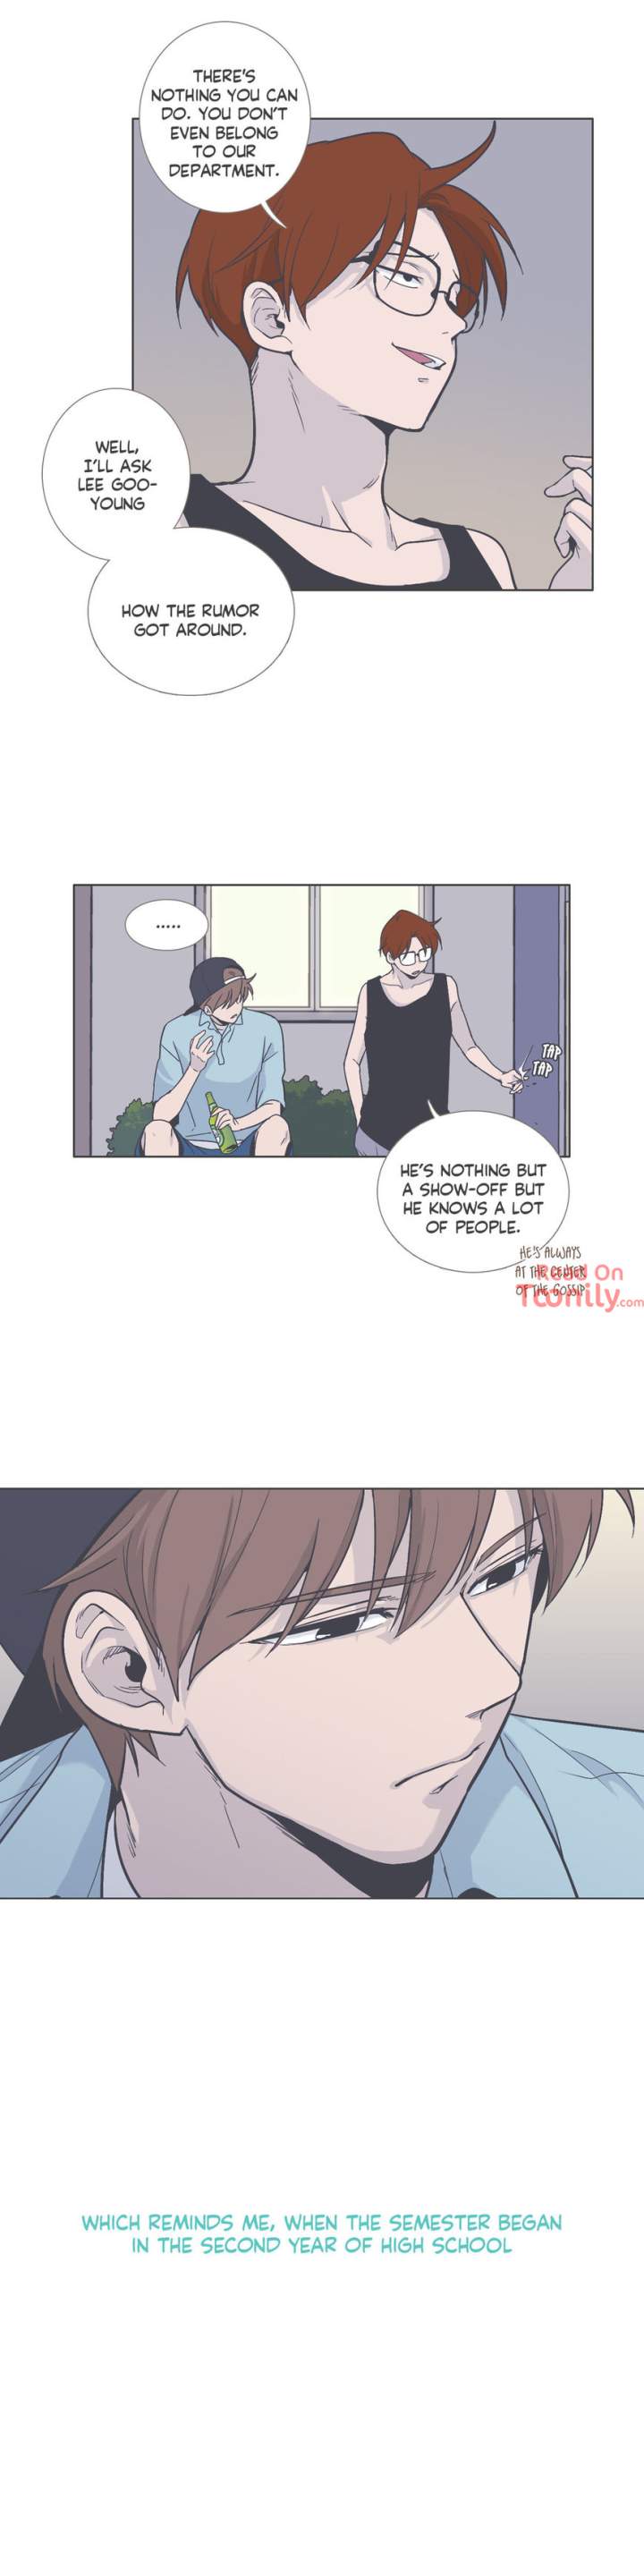 Something About Us - Chapter 45 Page 13